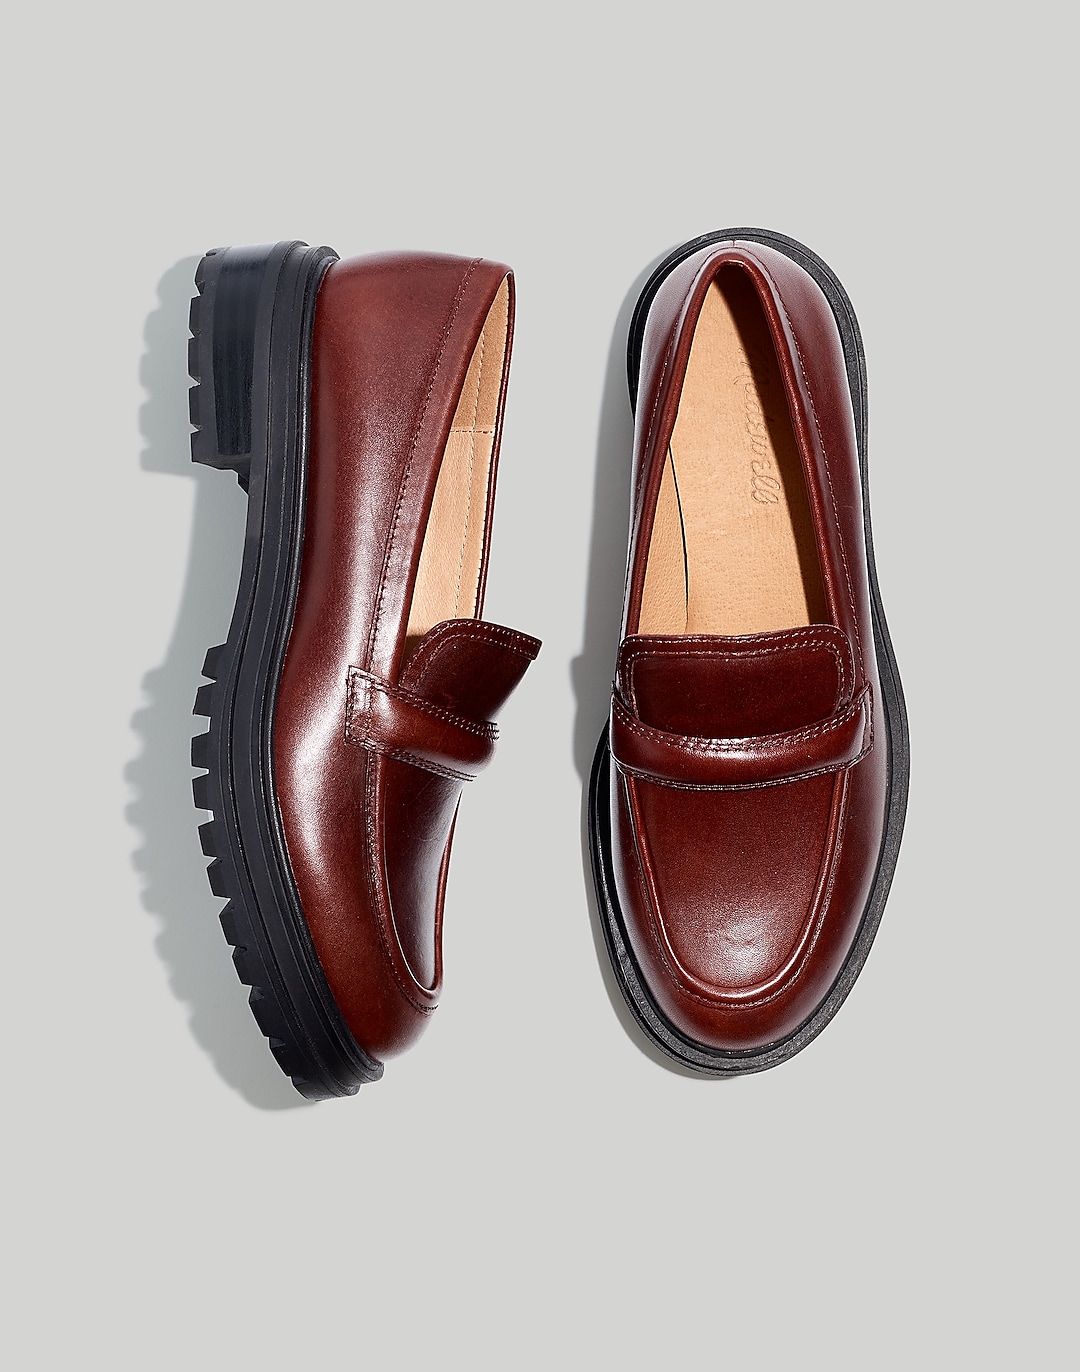 The Bradley Lugsole Loafer in Leather | Madewell